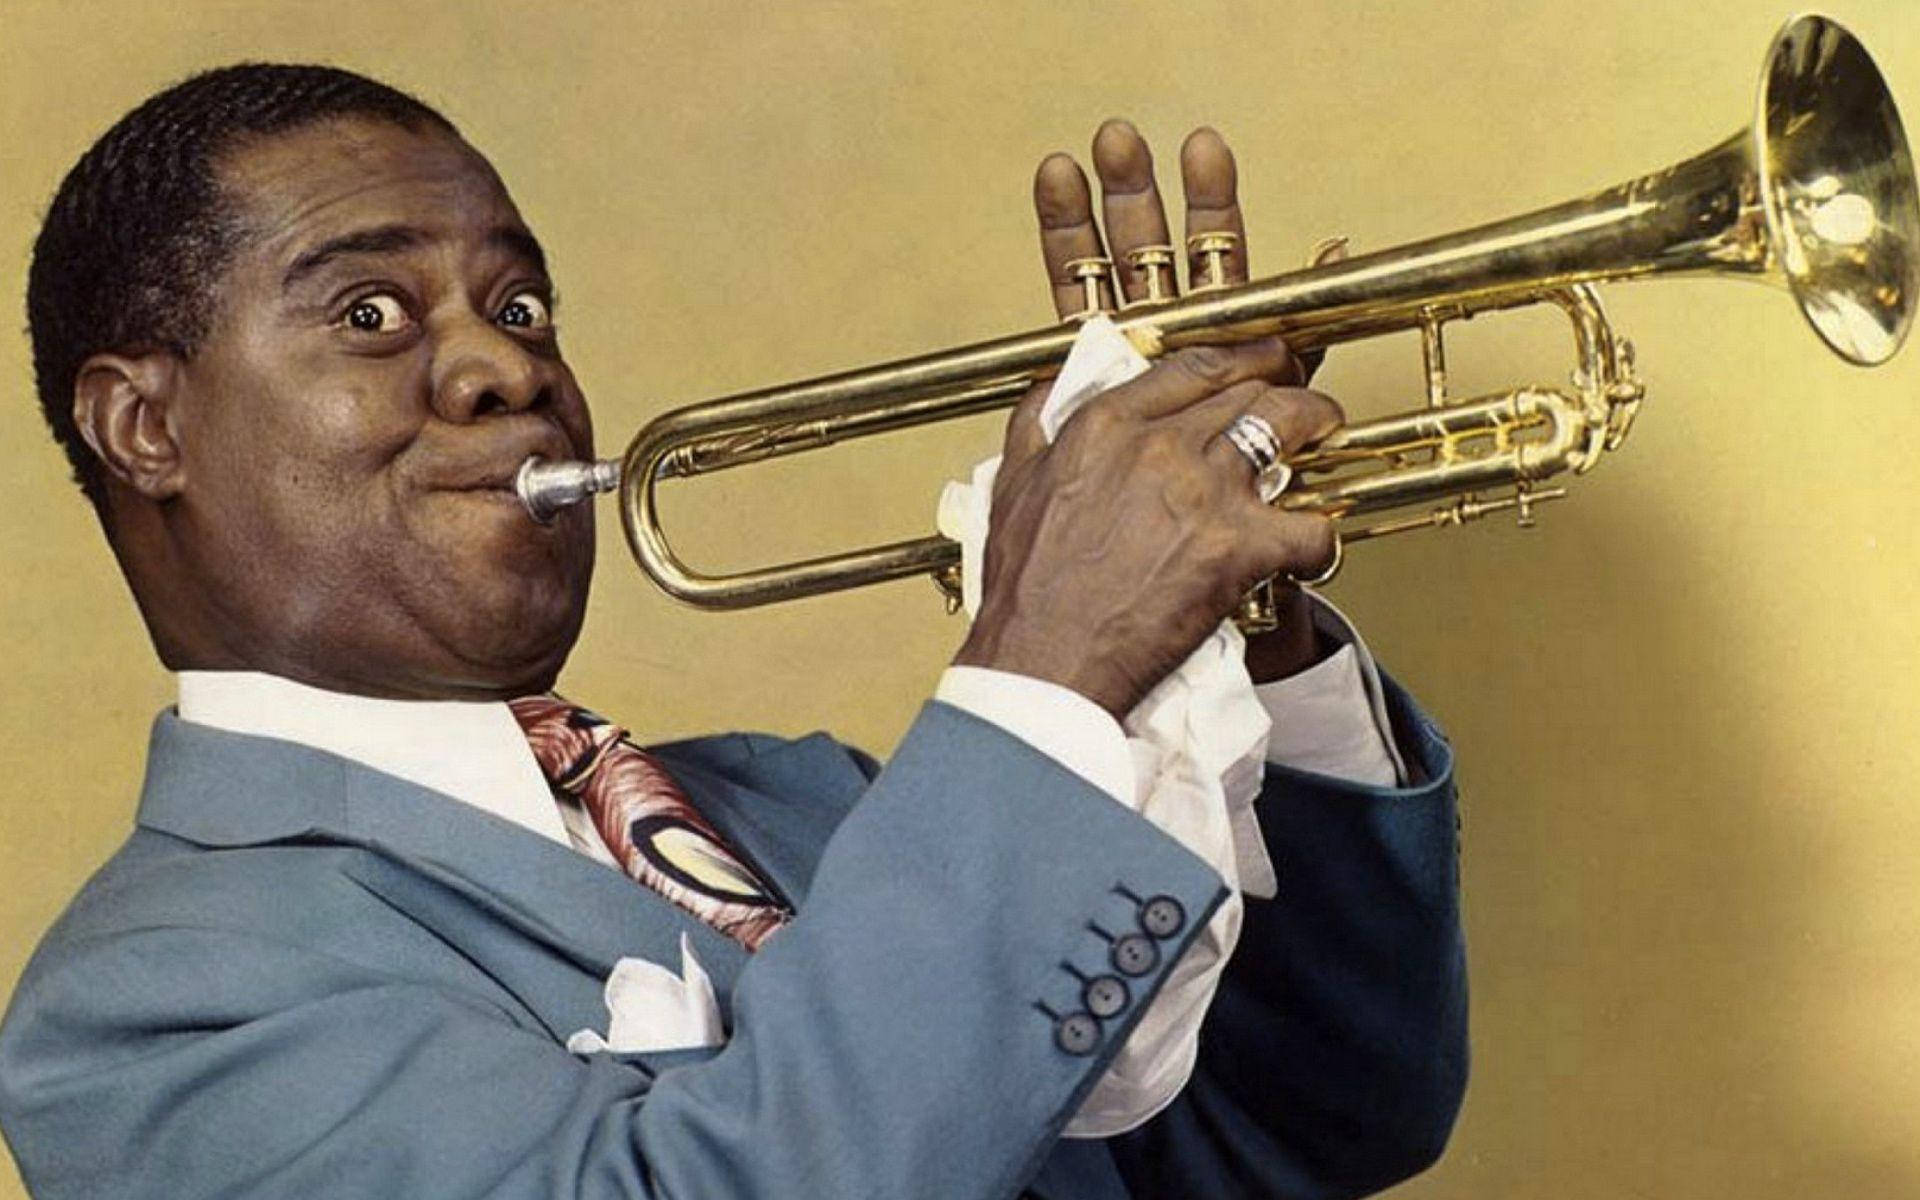 Louis Armstrong  New Orleans Trumpet Player & Singer